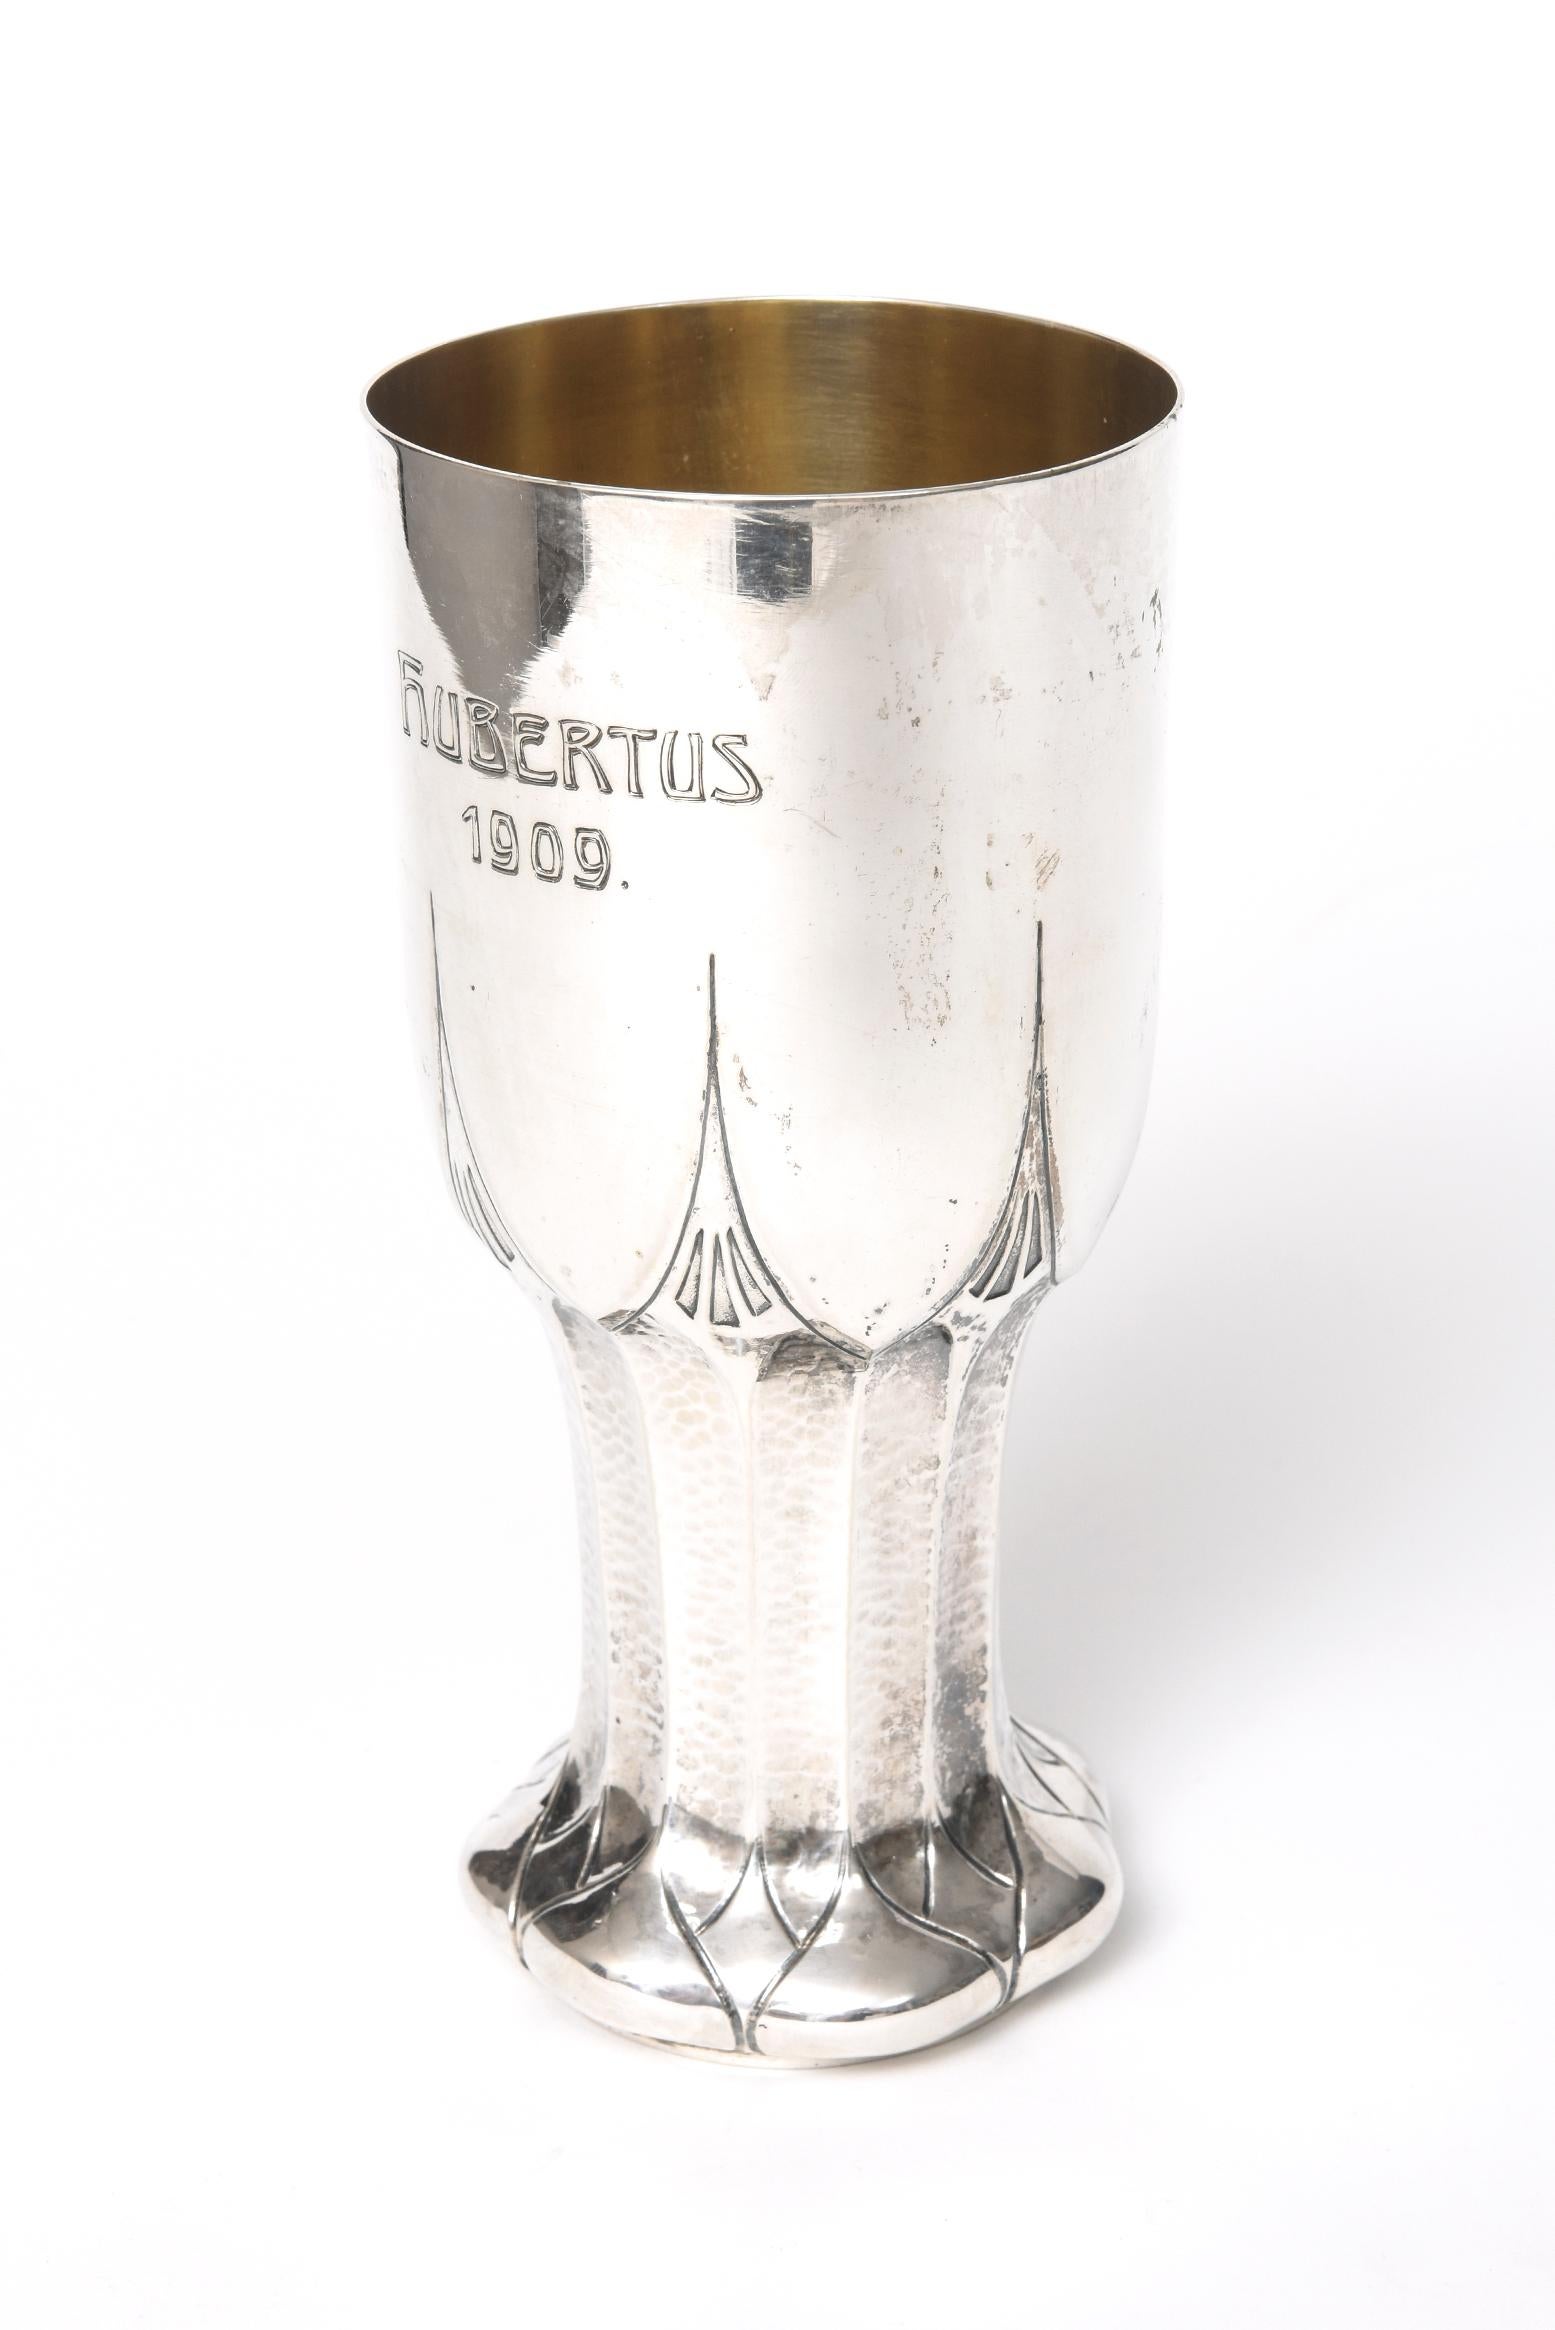 Stunning large arts and crafts 800 silver chalice featuring a hammered stem with a scalloped foot and geometric spikes going up the bowl of the cup. On the cup it is engraved Hubertus 1909. The bottom has German 800 silver hallmarks and is stamped